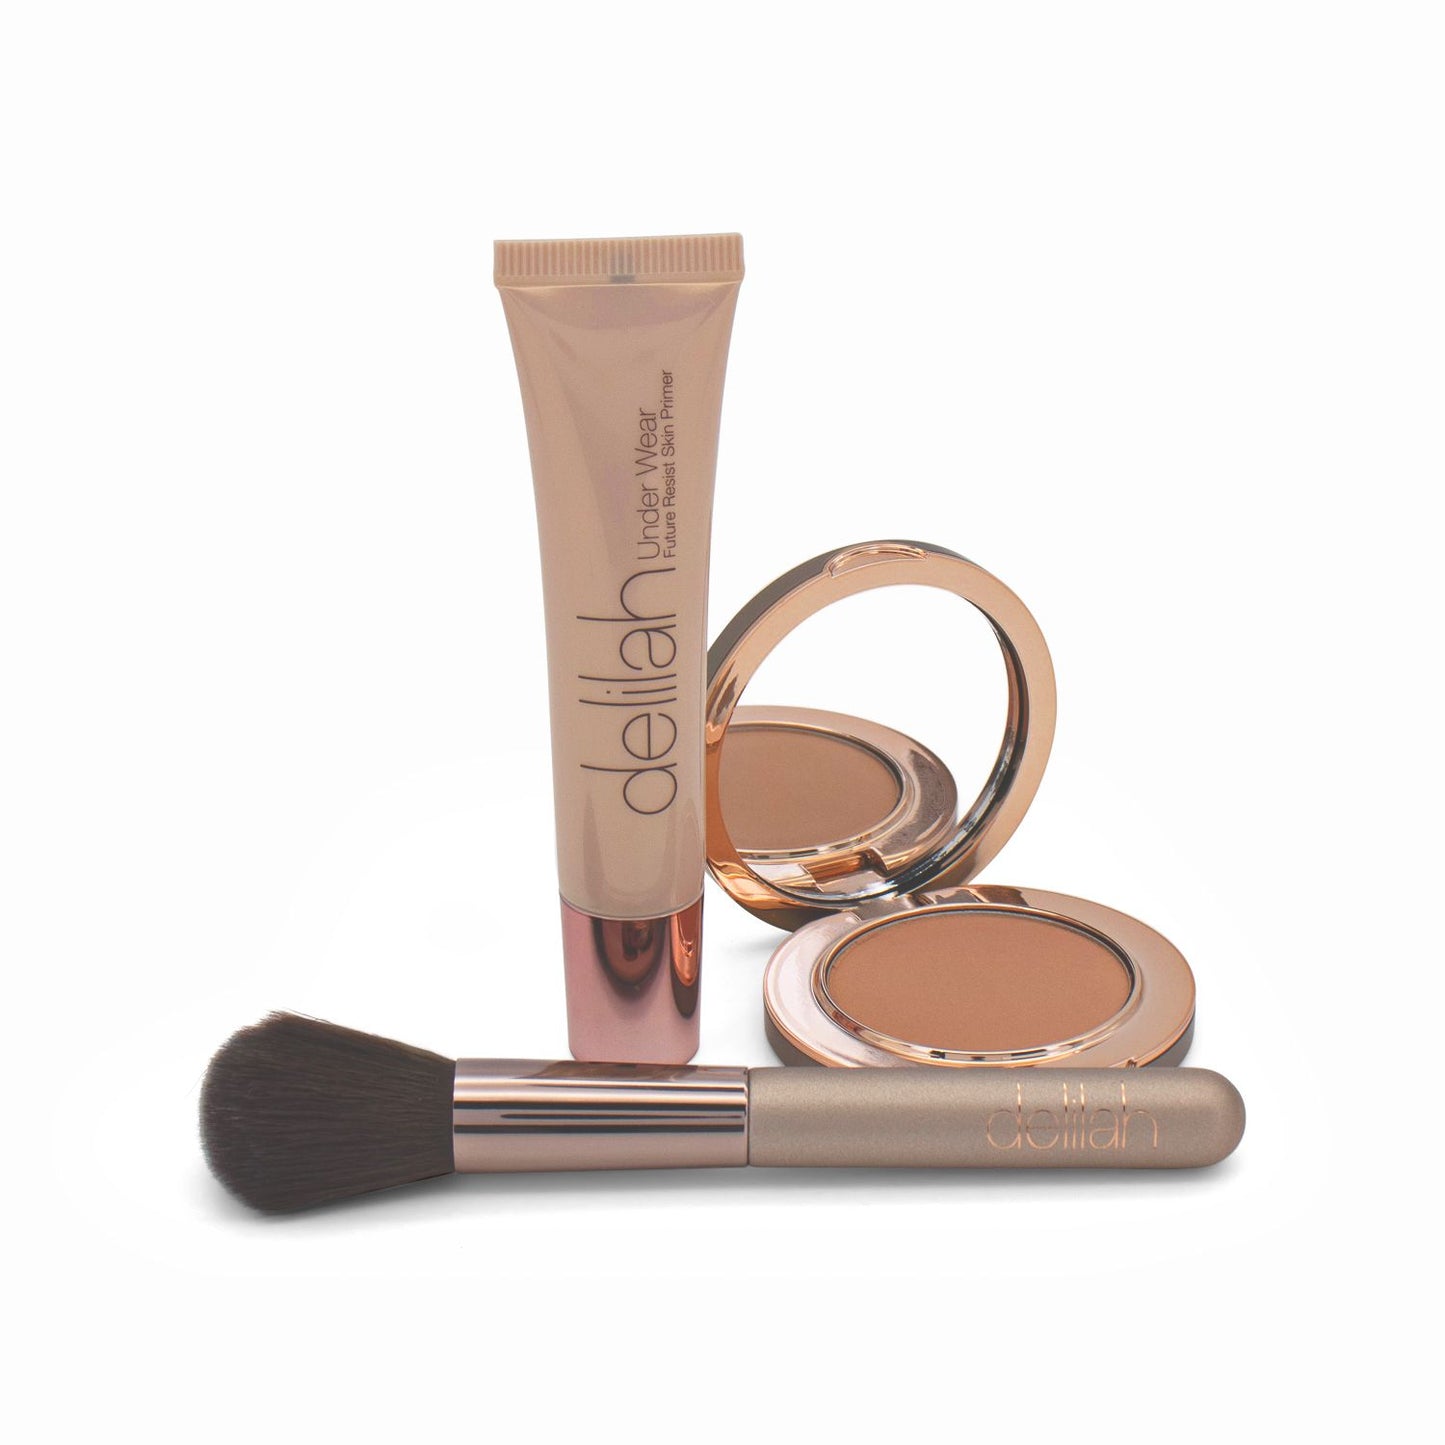 Delilah Easy To Love Essentials 3 Piece Discovery Collection - Imperfect Box